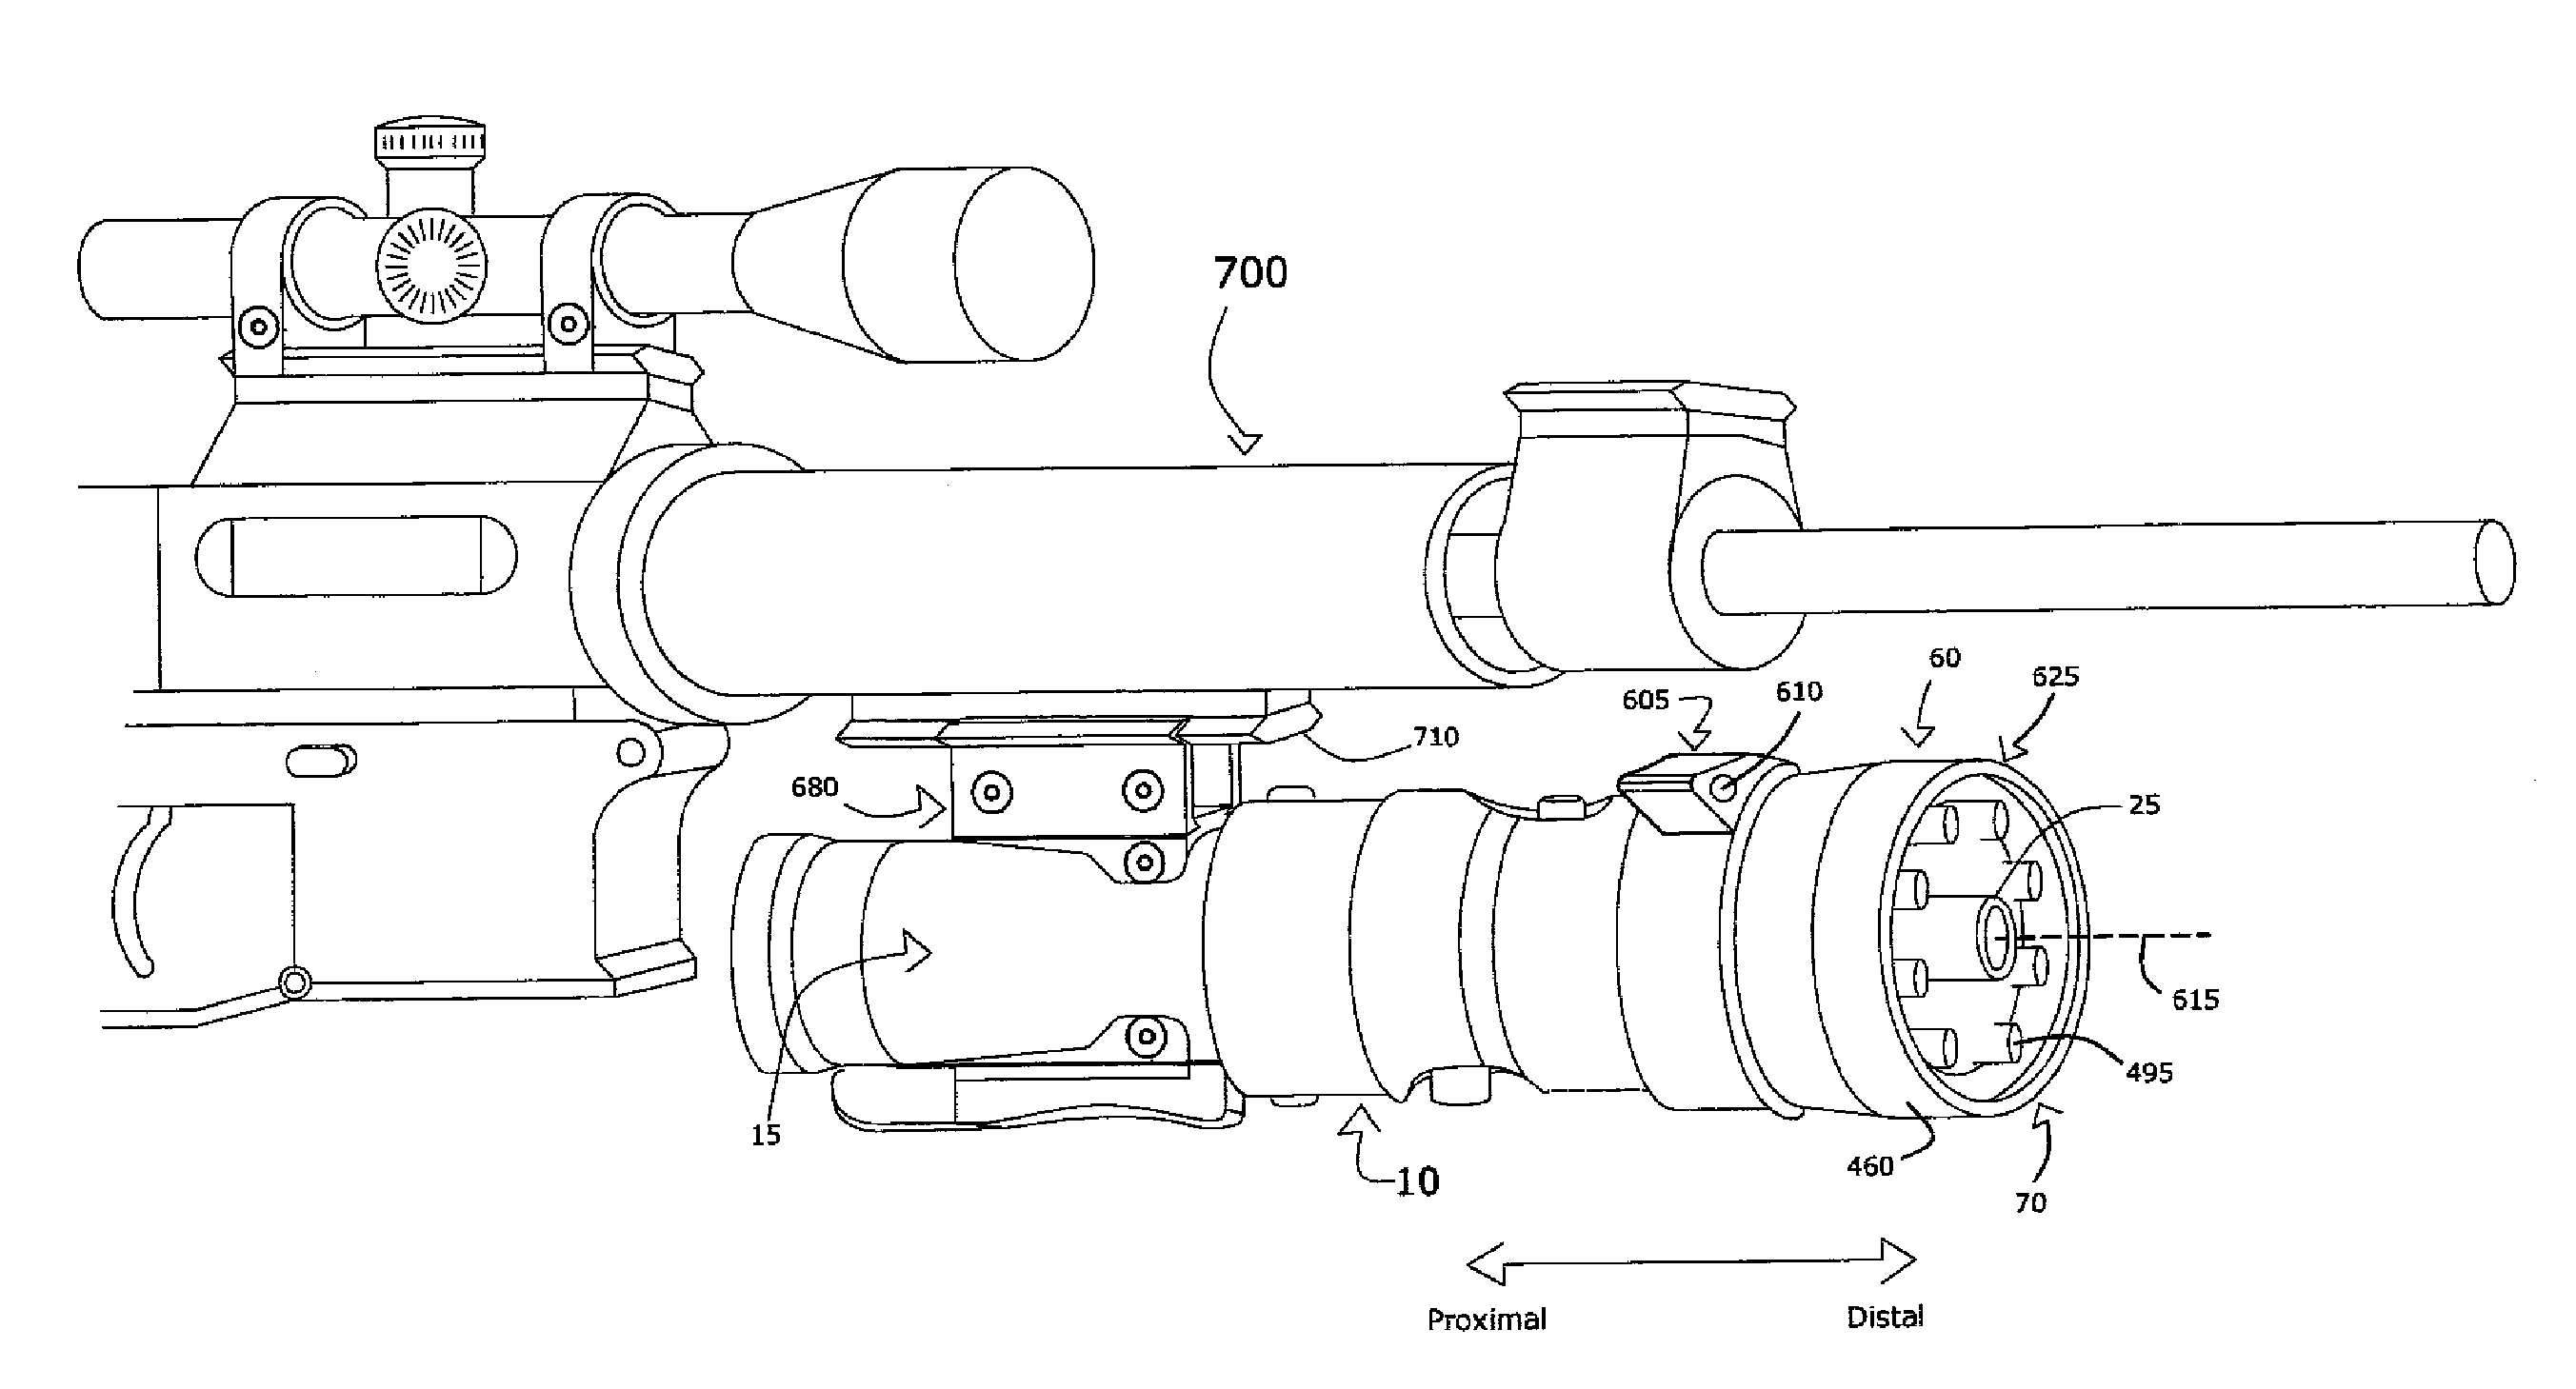 Systems and methods for providing a firearm with an extendable light source